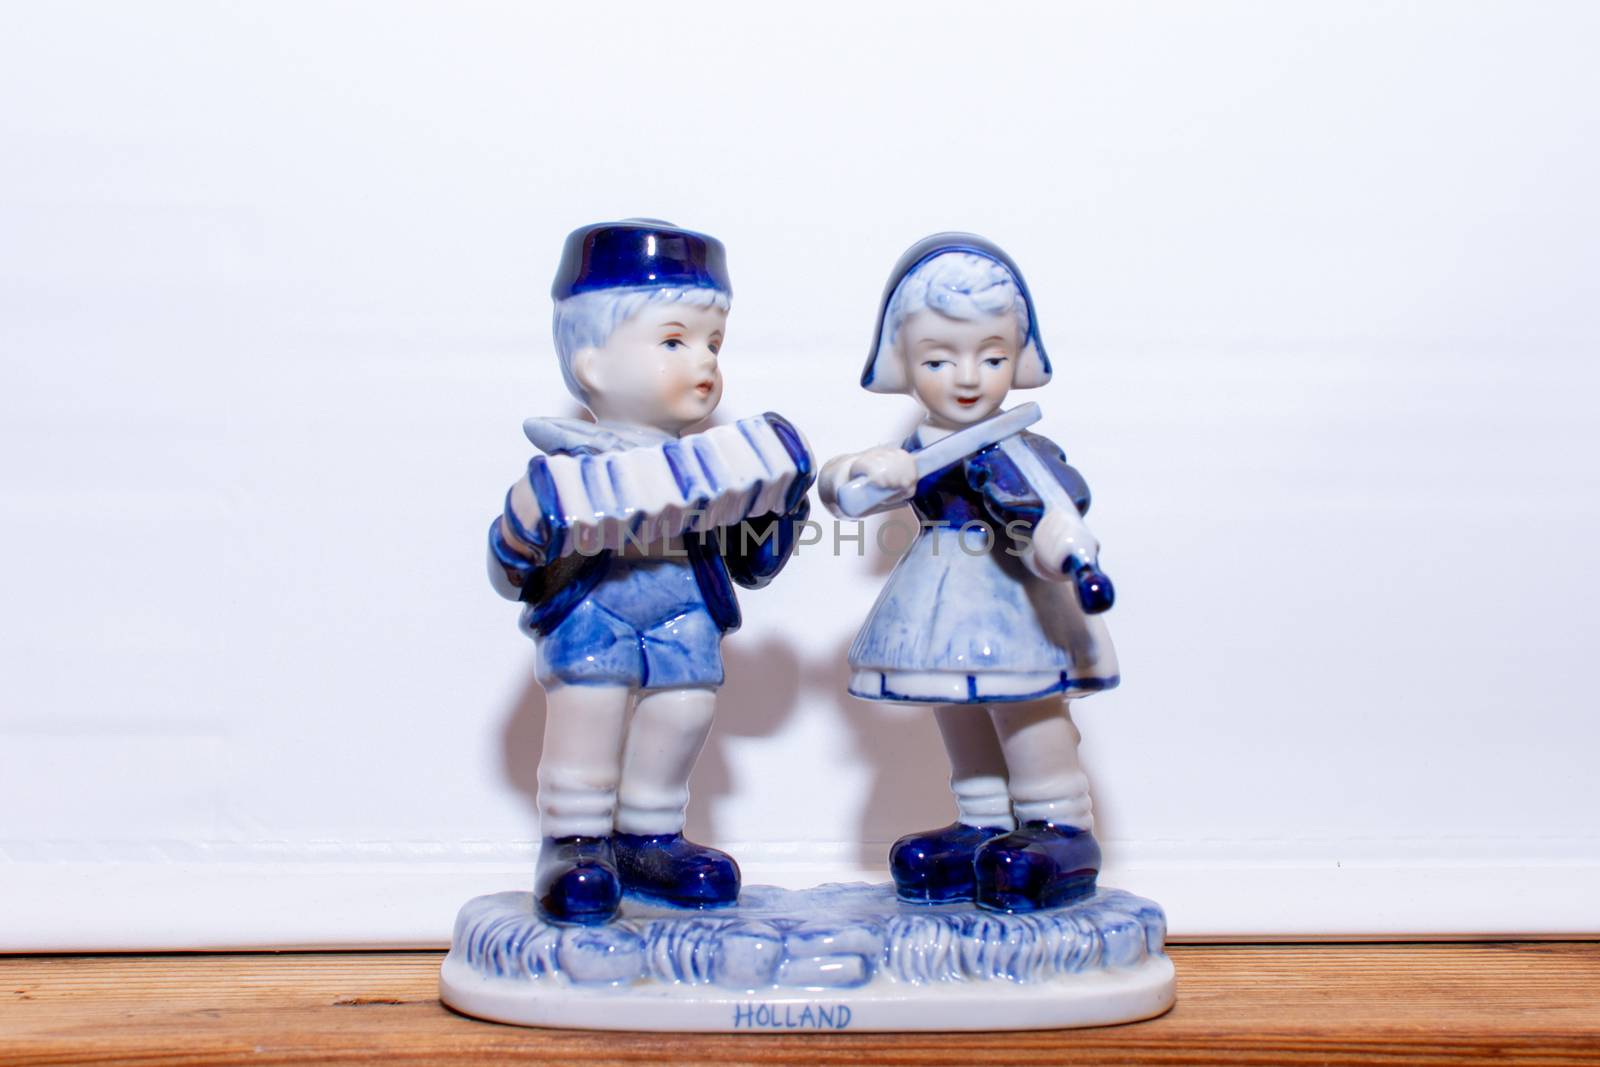 Delft Blue Figurine of Dutch couple playing music on a violin and accordian. Souvenir from Holland/Netherlands. Isolated on white background.